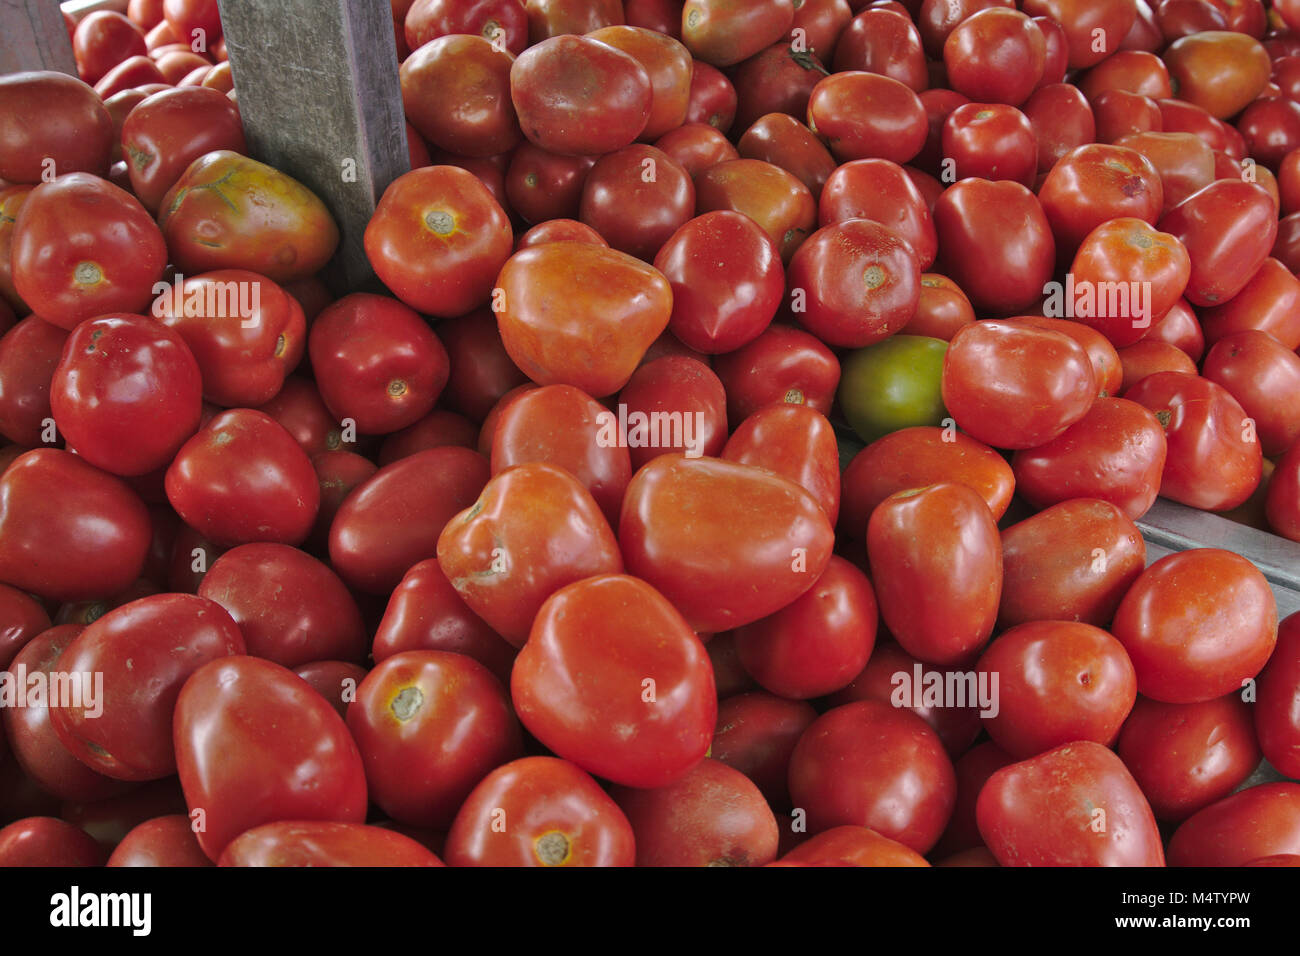 Roma tomatoes at a farmers market stall. Stock Photo